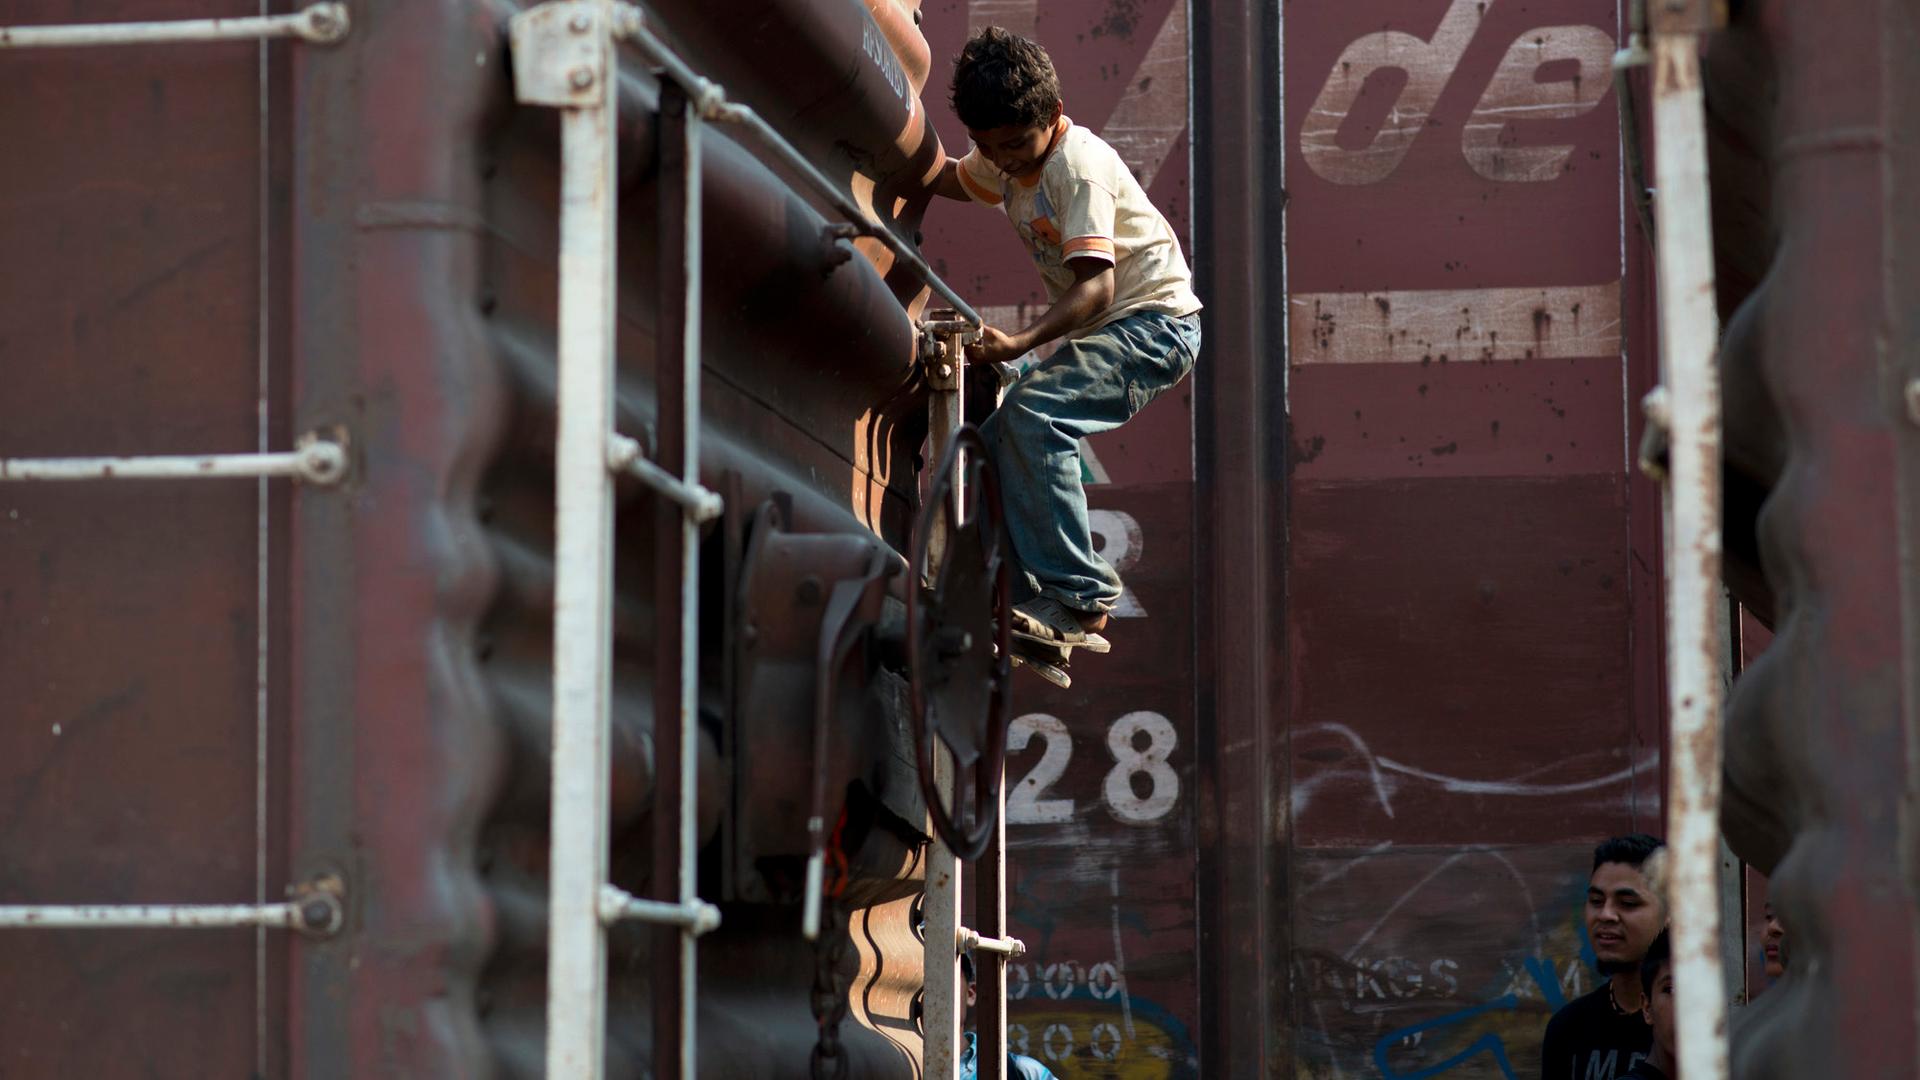 A child boards a freight train near Arriaga, Chiapas, in southern Mexico. Arriaga is the first stop for many Central American migrants making their way to the US.